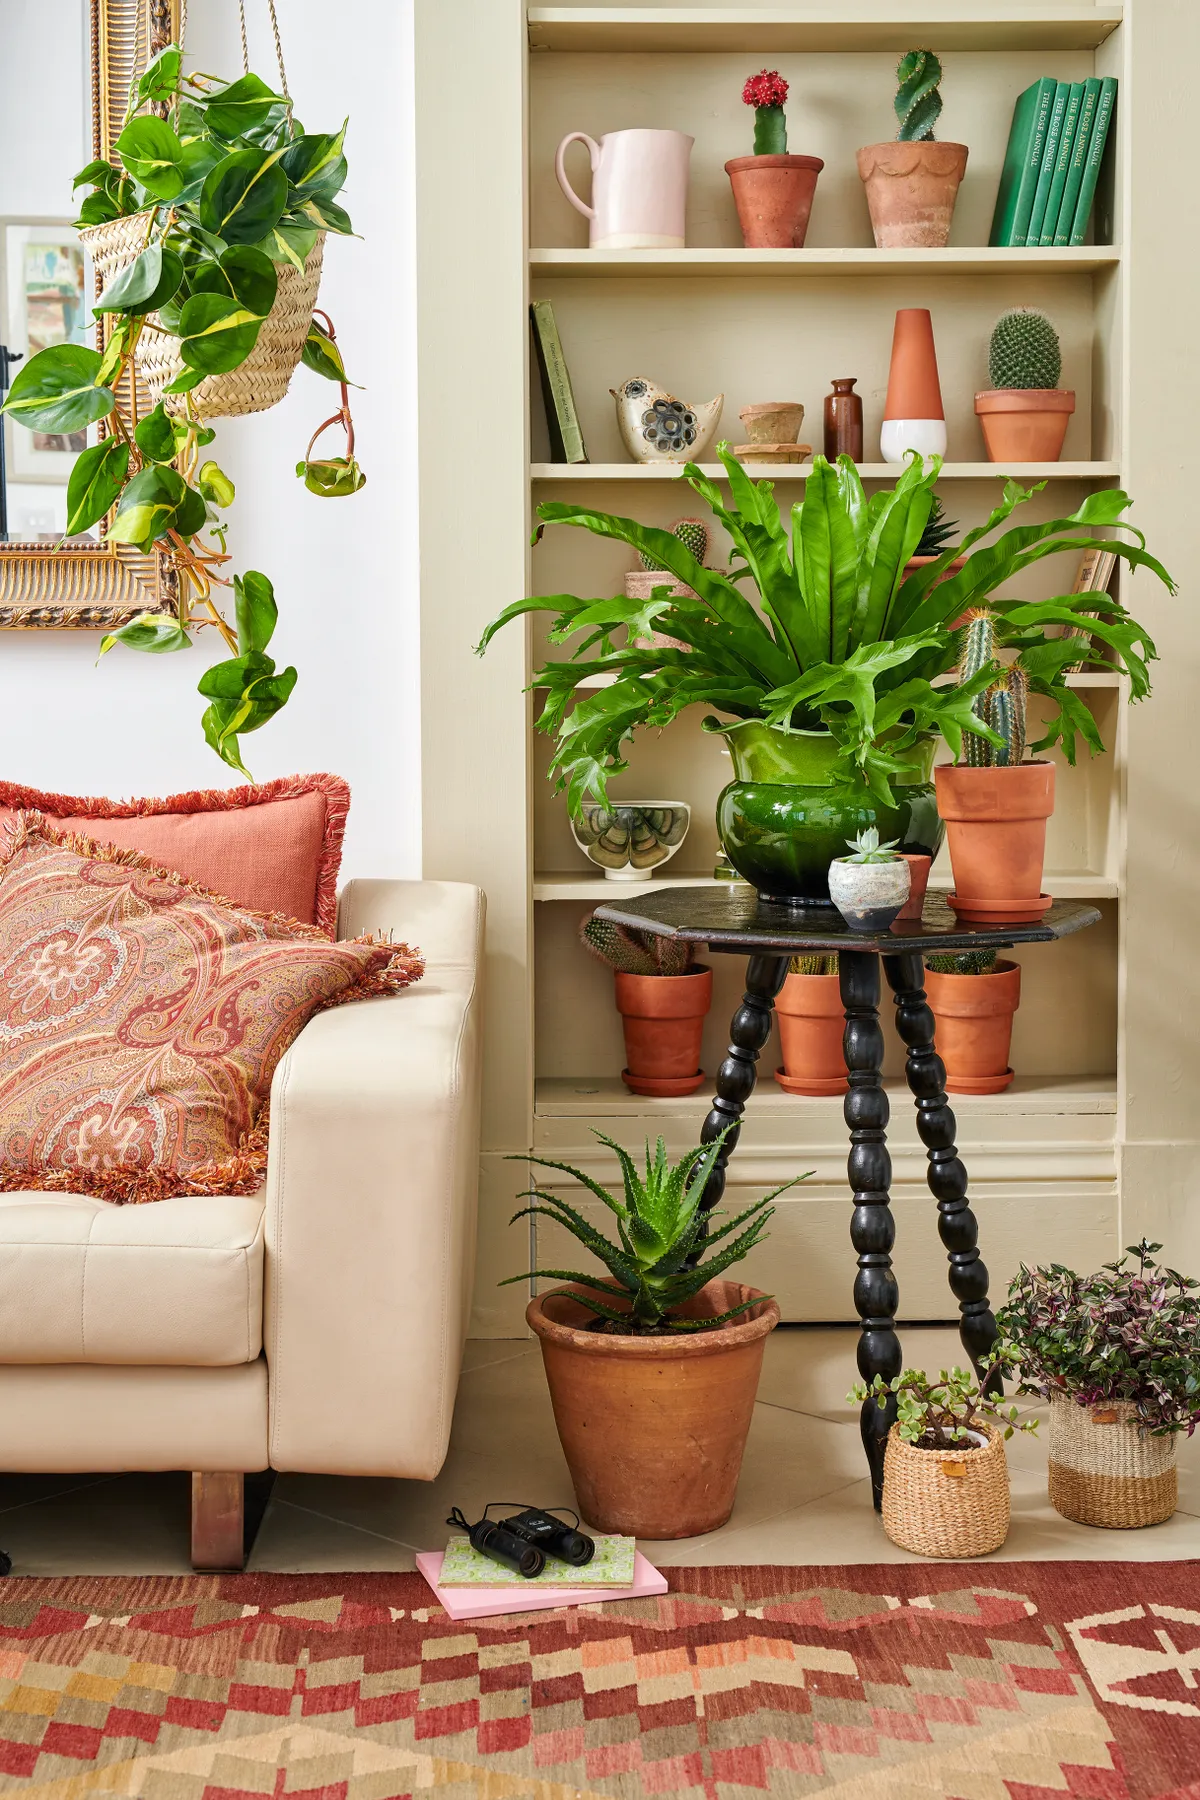 An antique side table laden with leafy plants alongside a contemporary cream sofa.